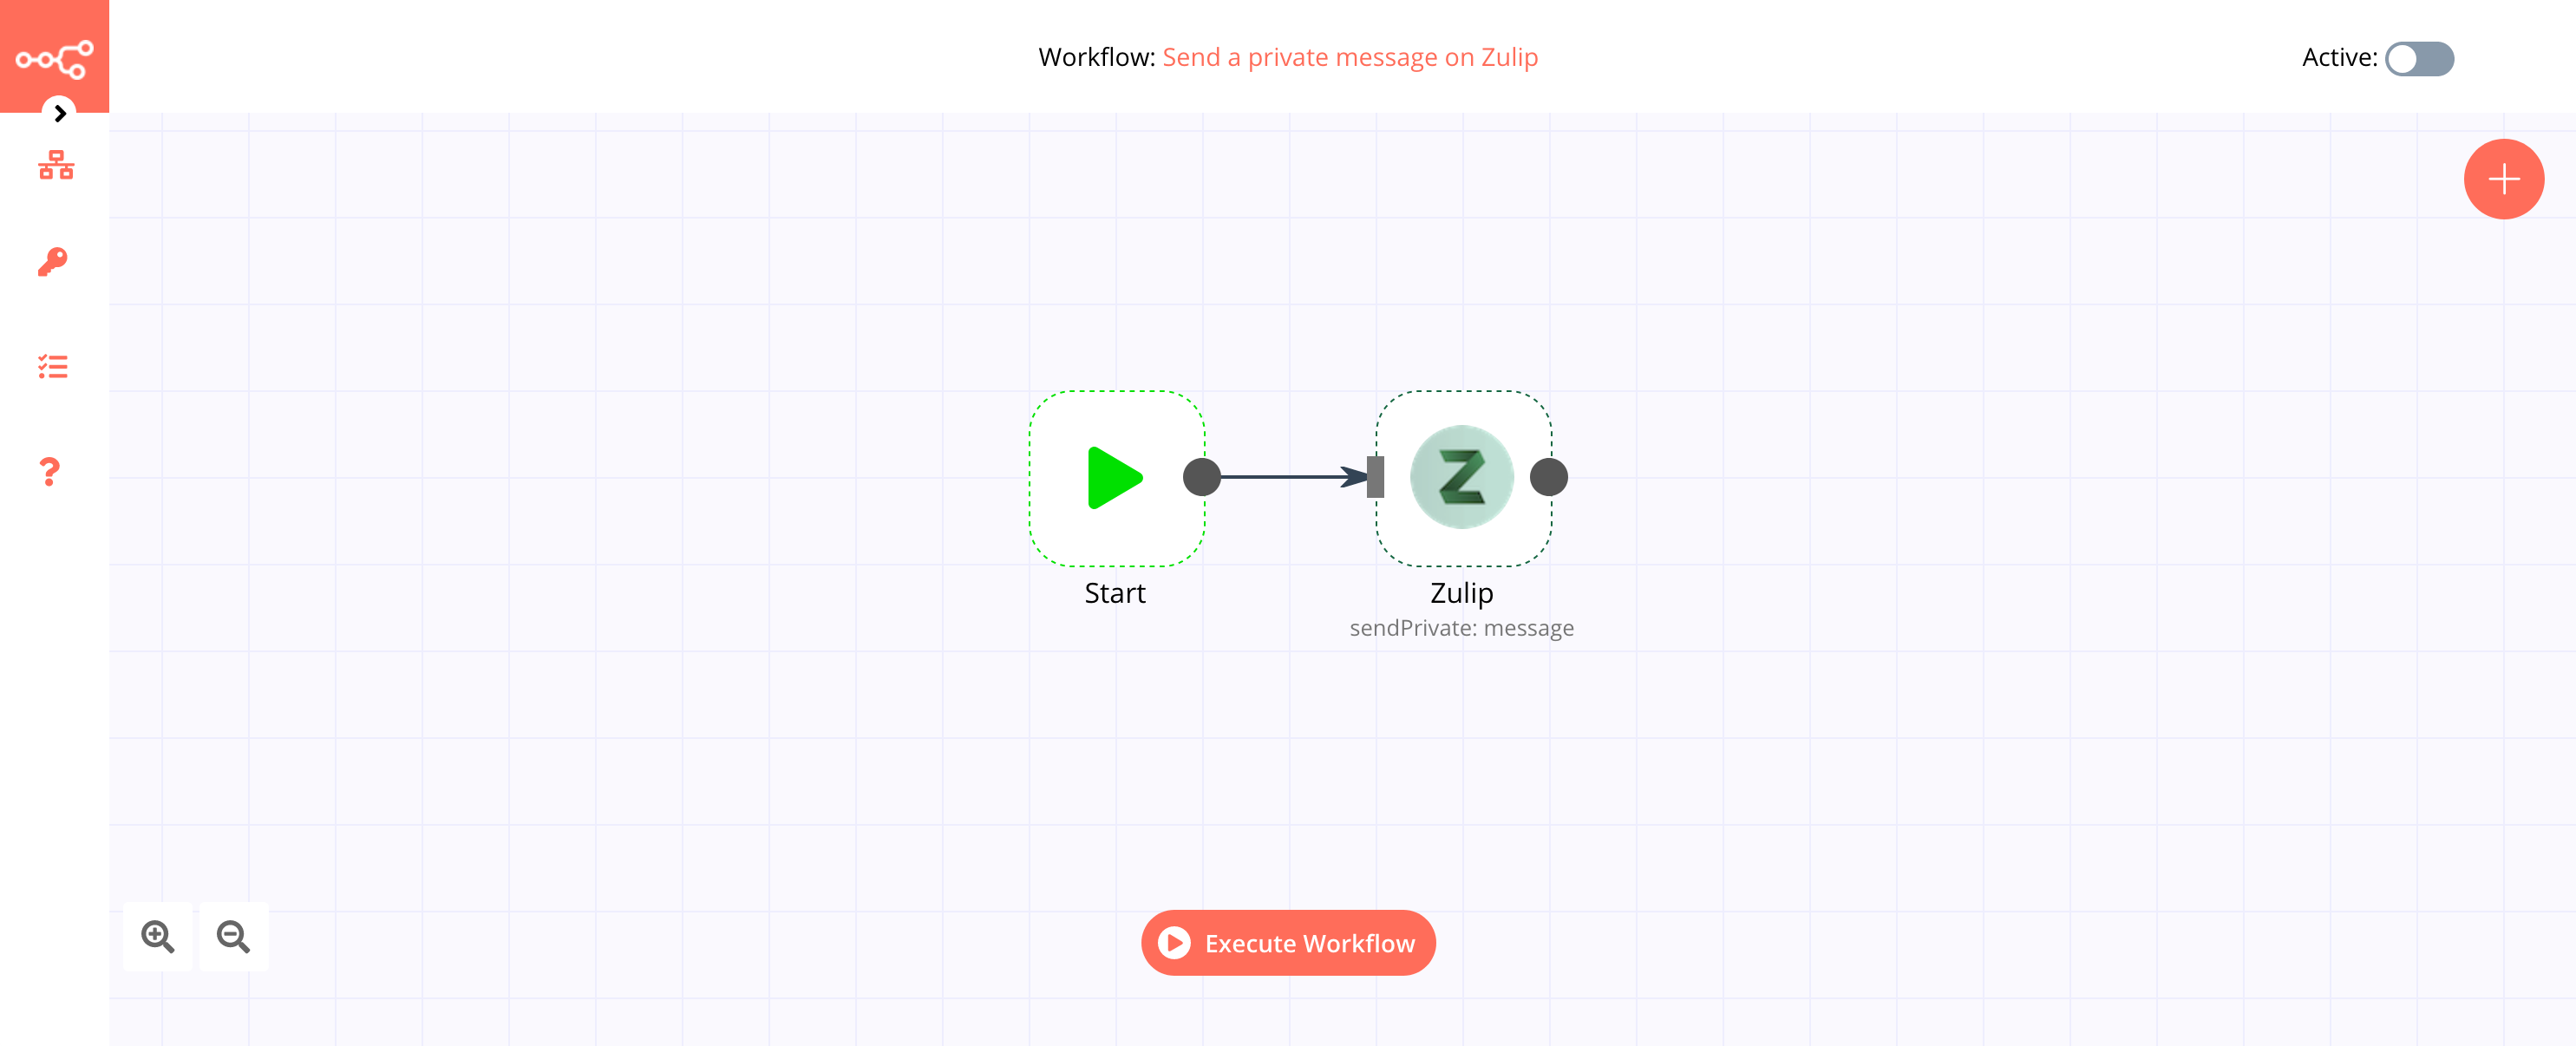 A workflow with the Zulip node